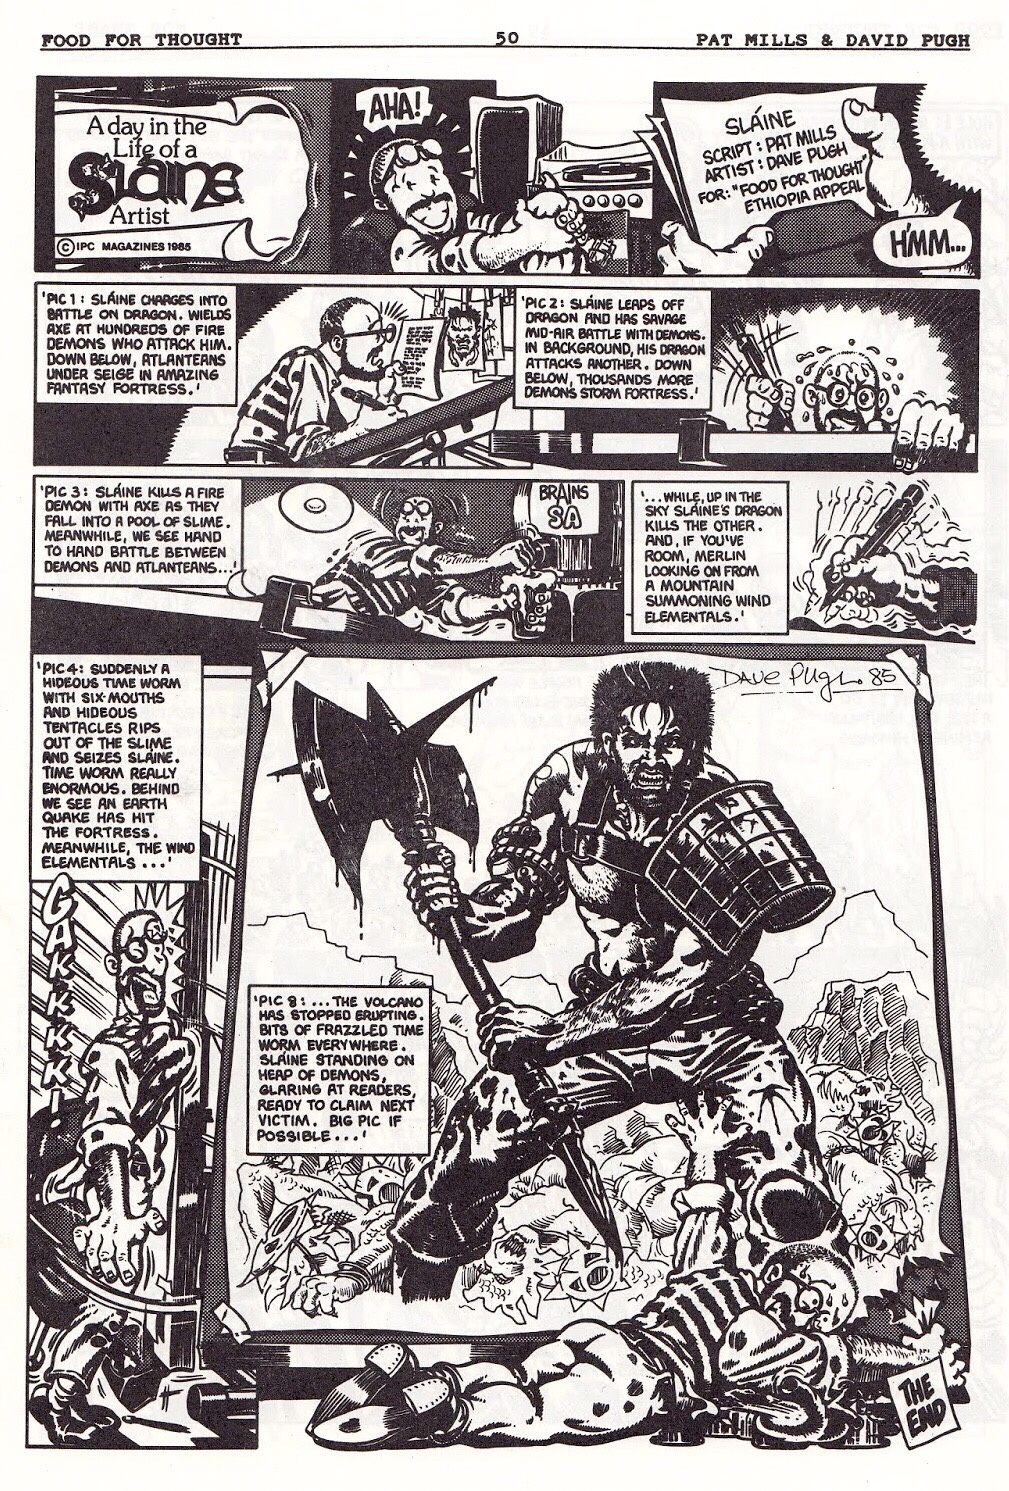 Food for Thought - strip by Pat Mills & David Pugh